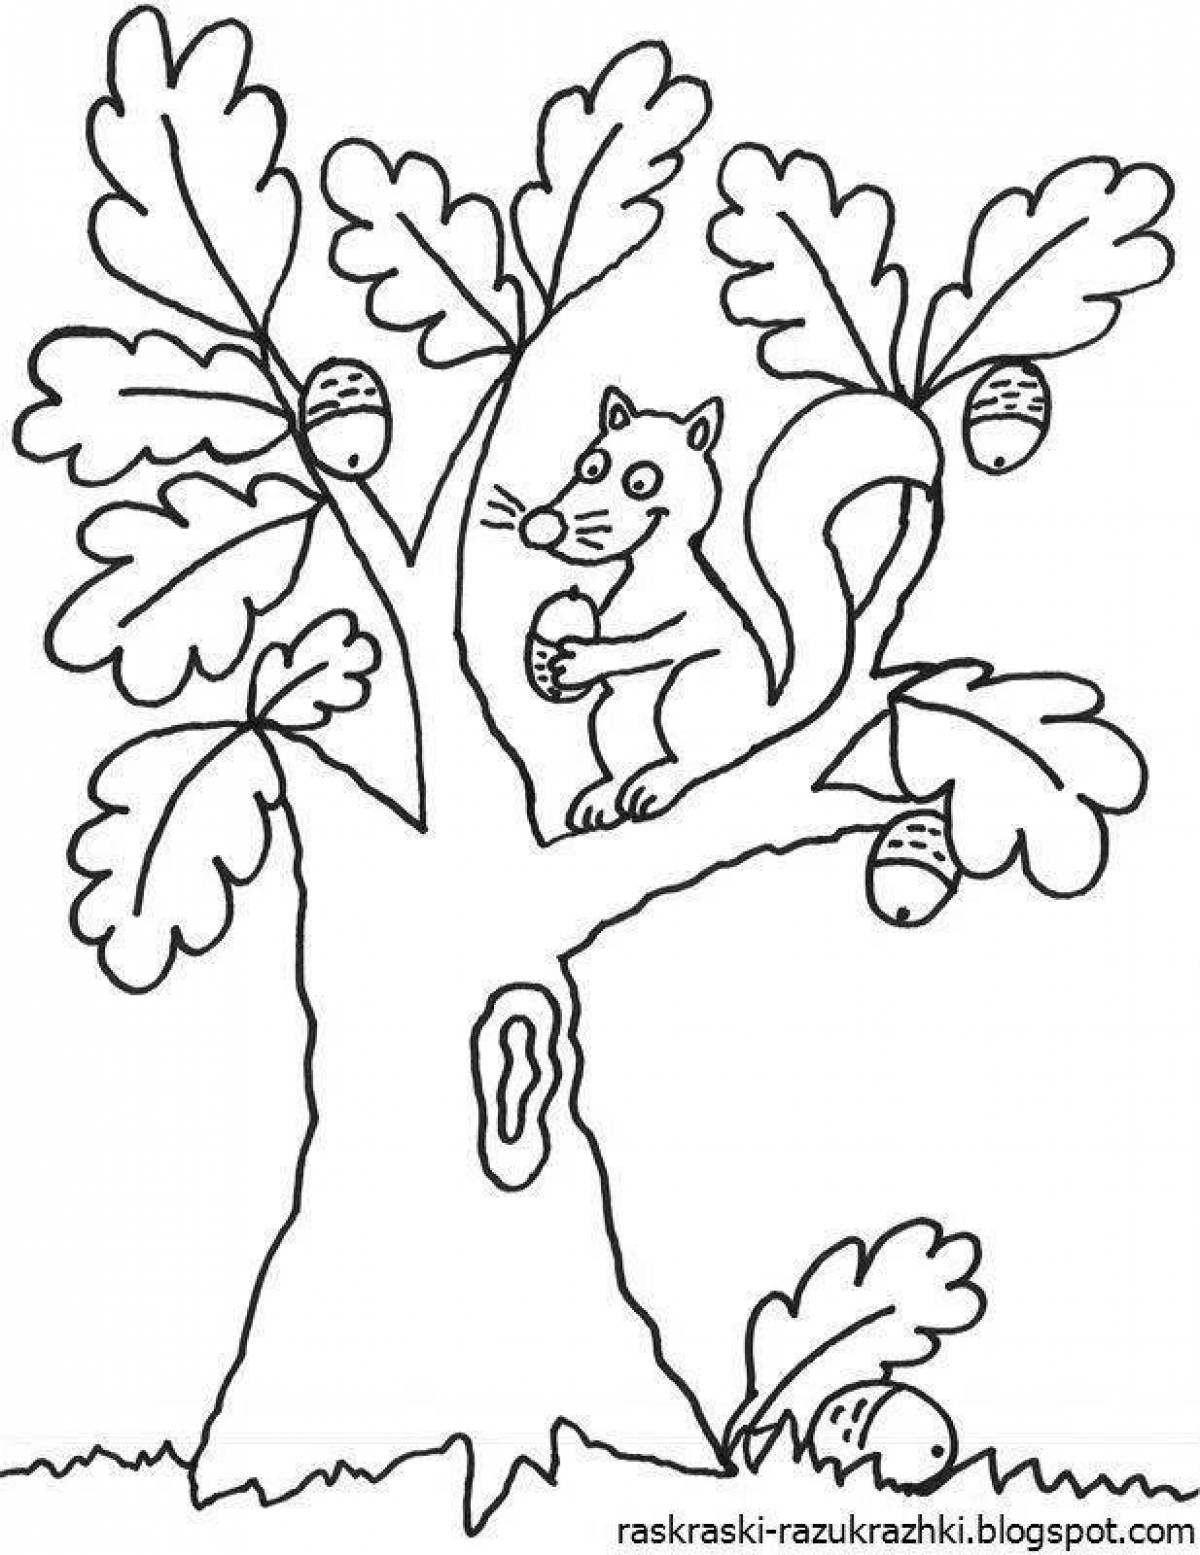 Lovely oak coloring book for little ones